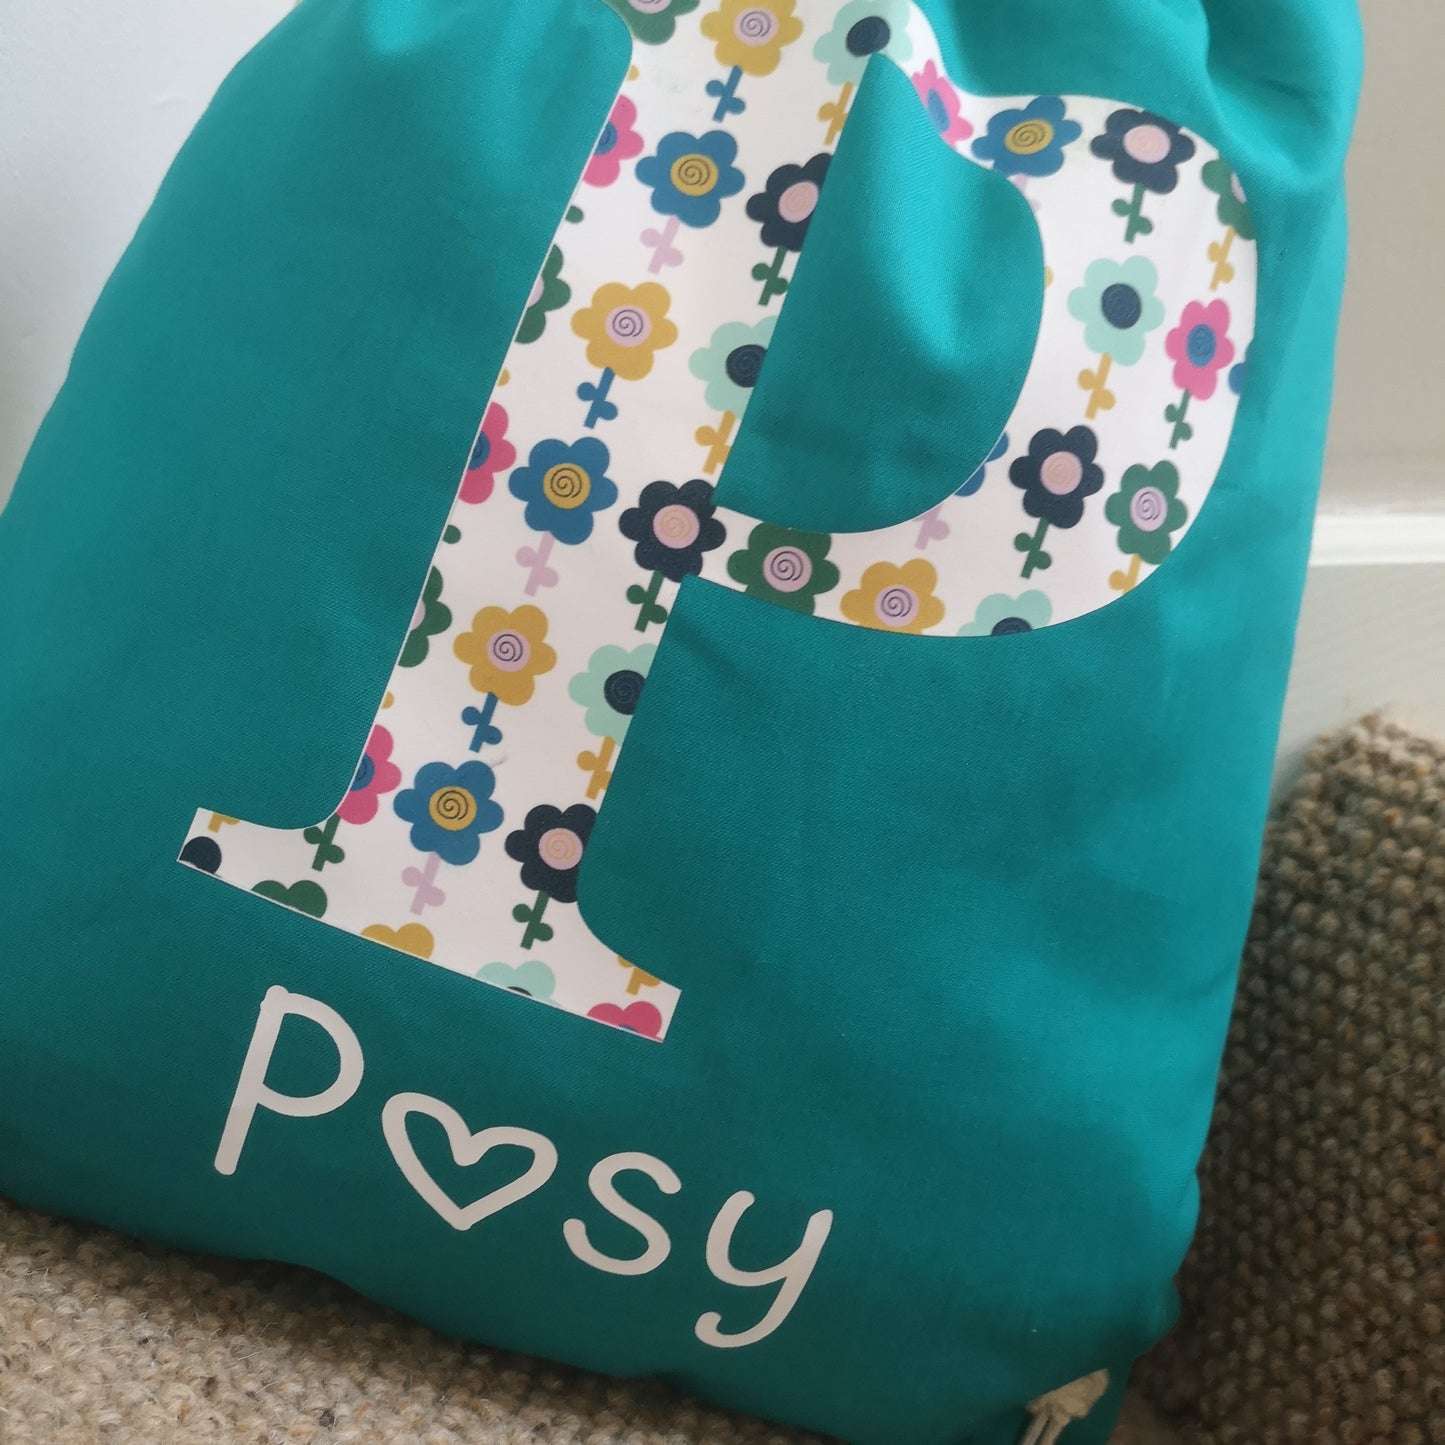 A close up of an emerald green personalised light drawstring bag with a patterned Initial and their name underneath